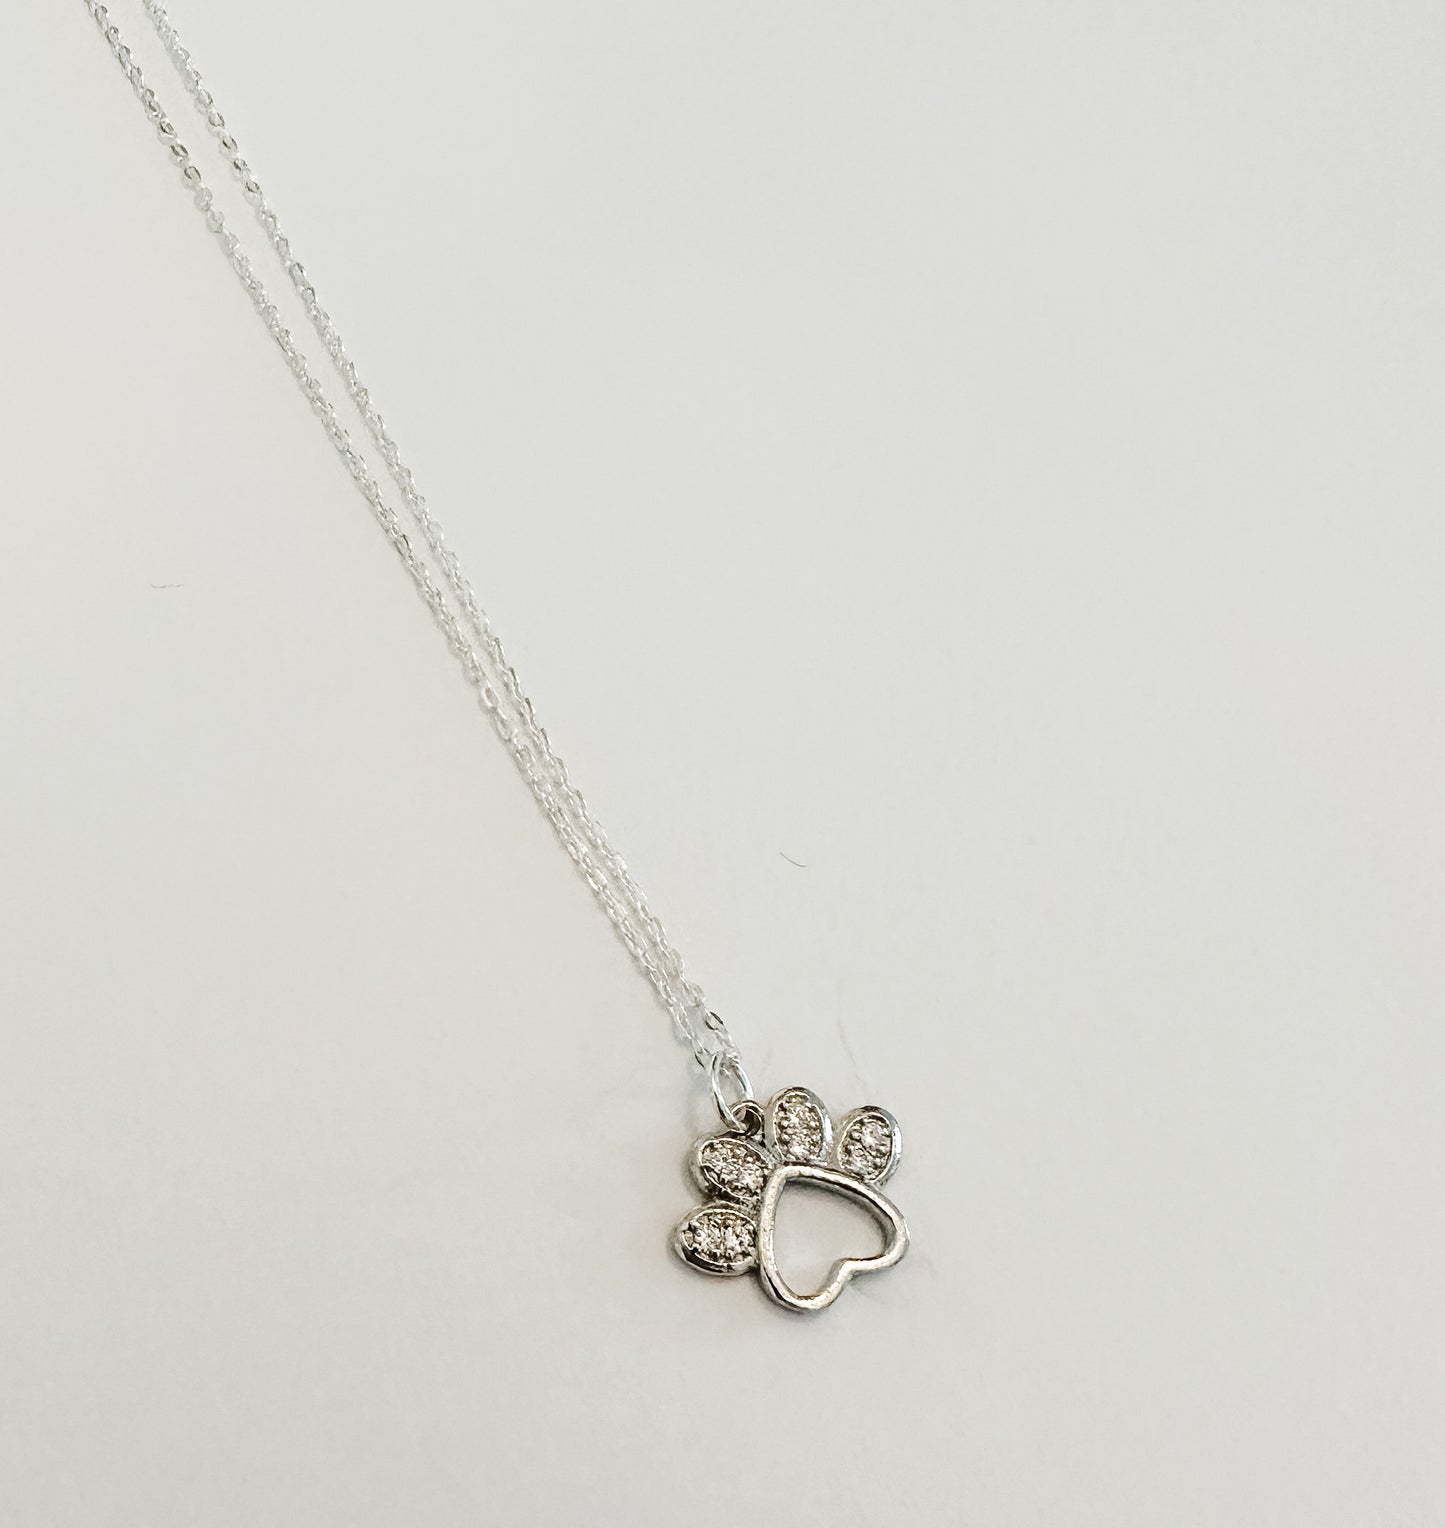 The Dog Paw Necklace